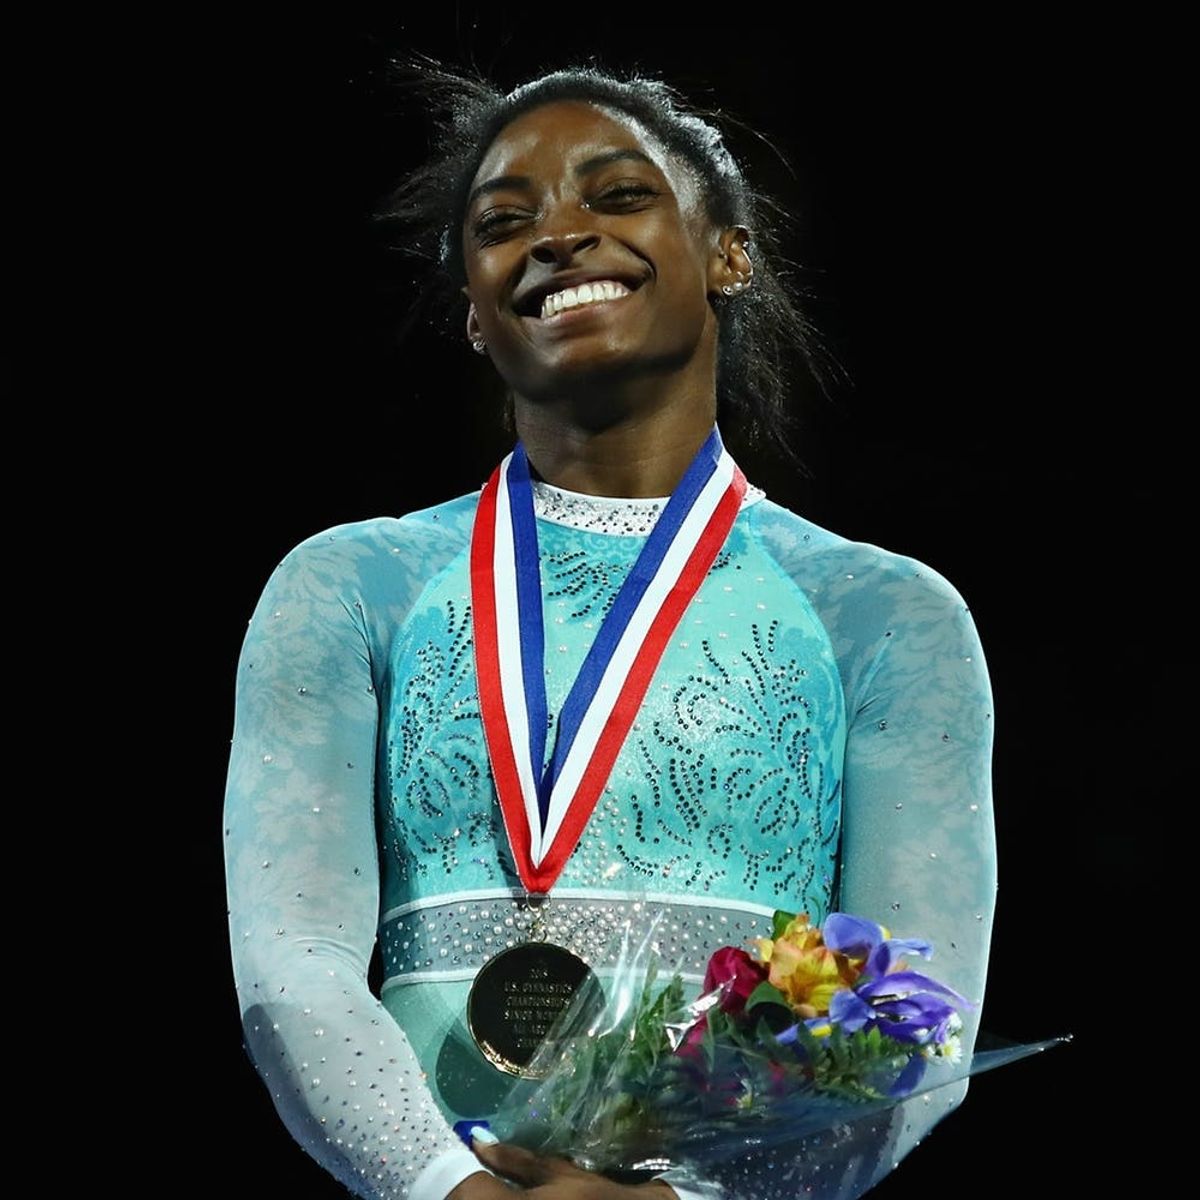 Simone Biles Just Made History in a Leotard for Sexual Abuse Survivors